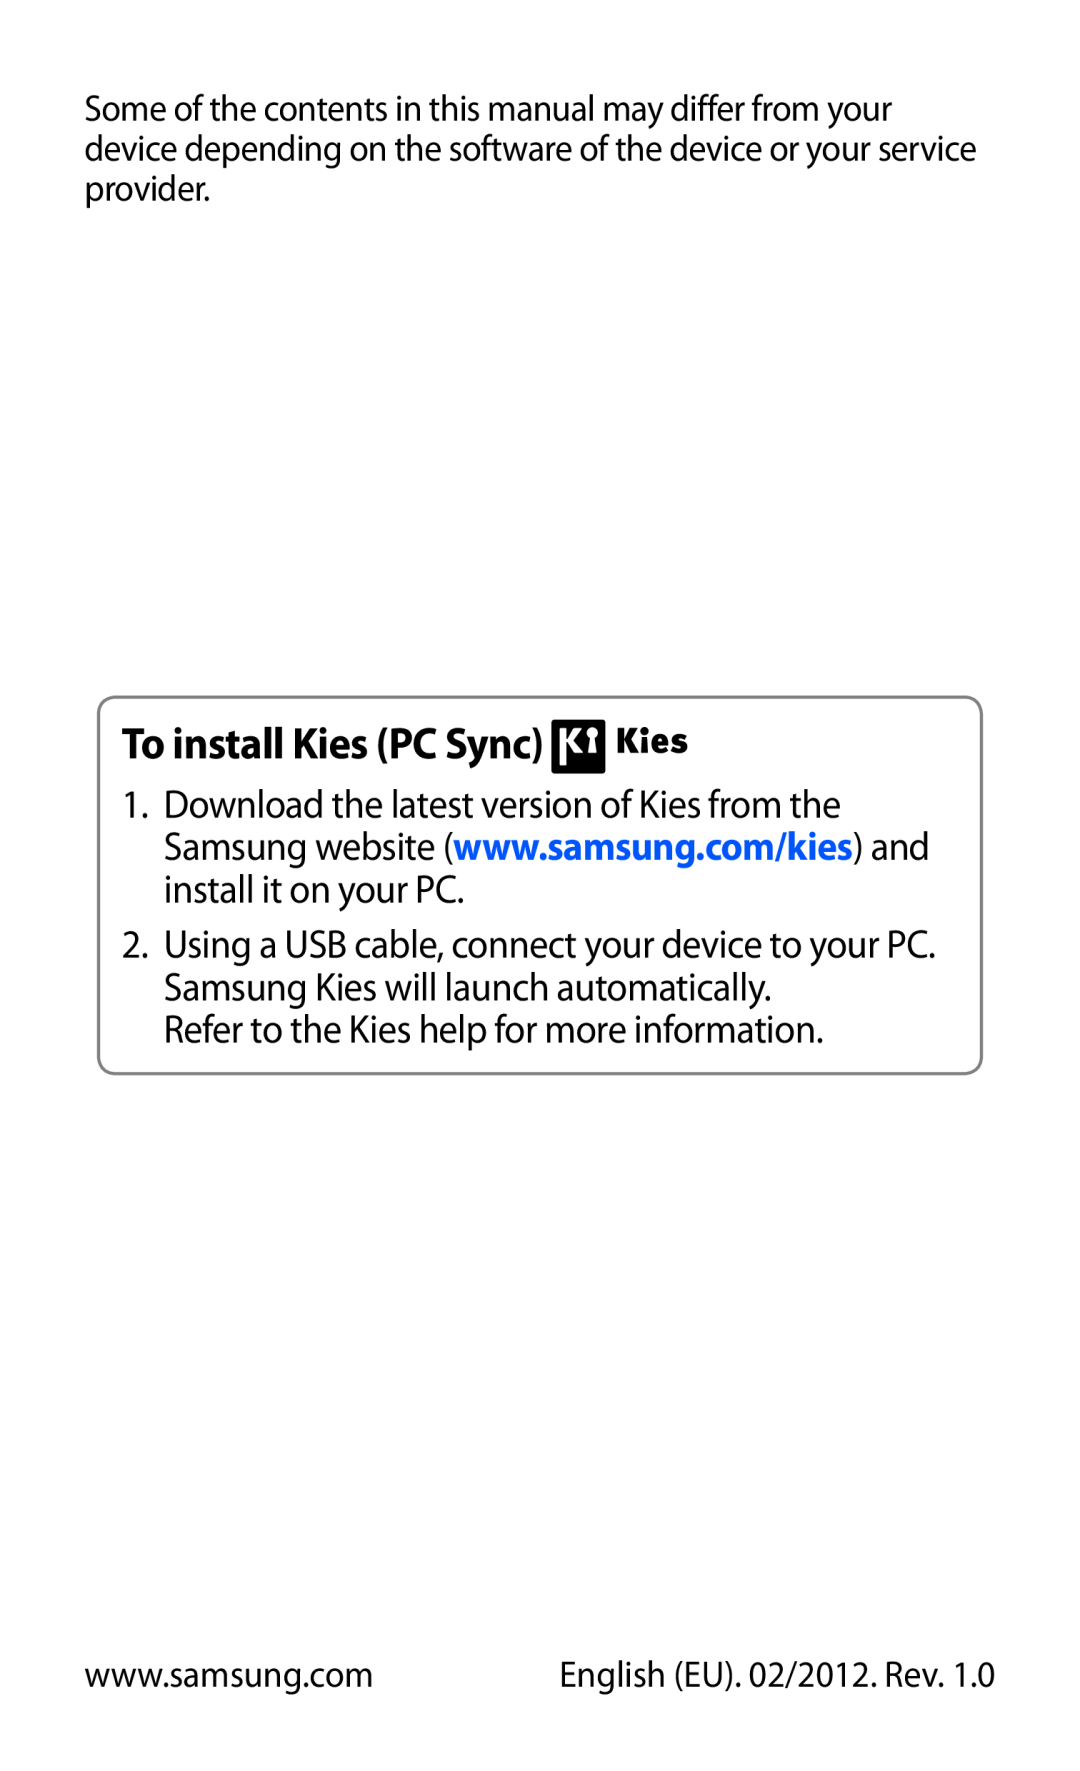 Samsung GT-P7320UWAPAN, GT-P7320UWAVD2, GT-P7320FKAOPT To install Kies PC Sync, Refer to the Kies help for more information 